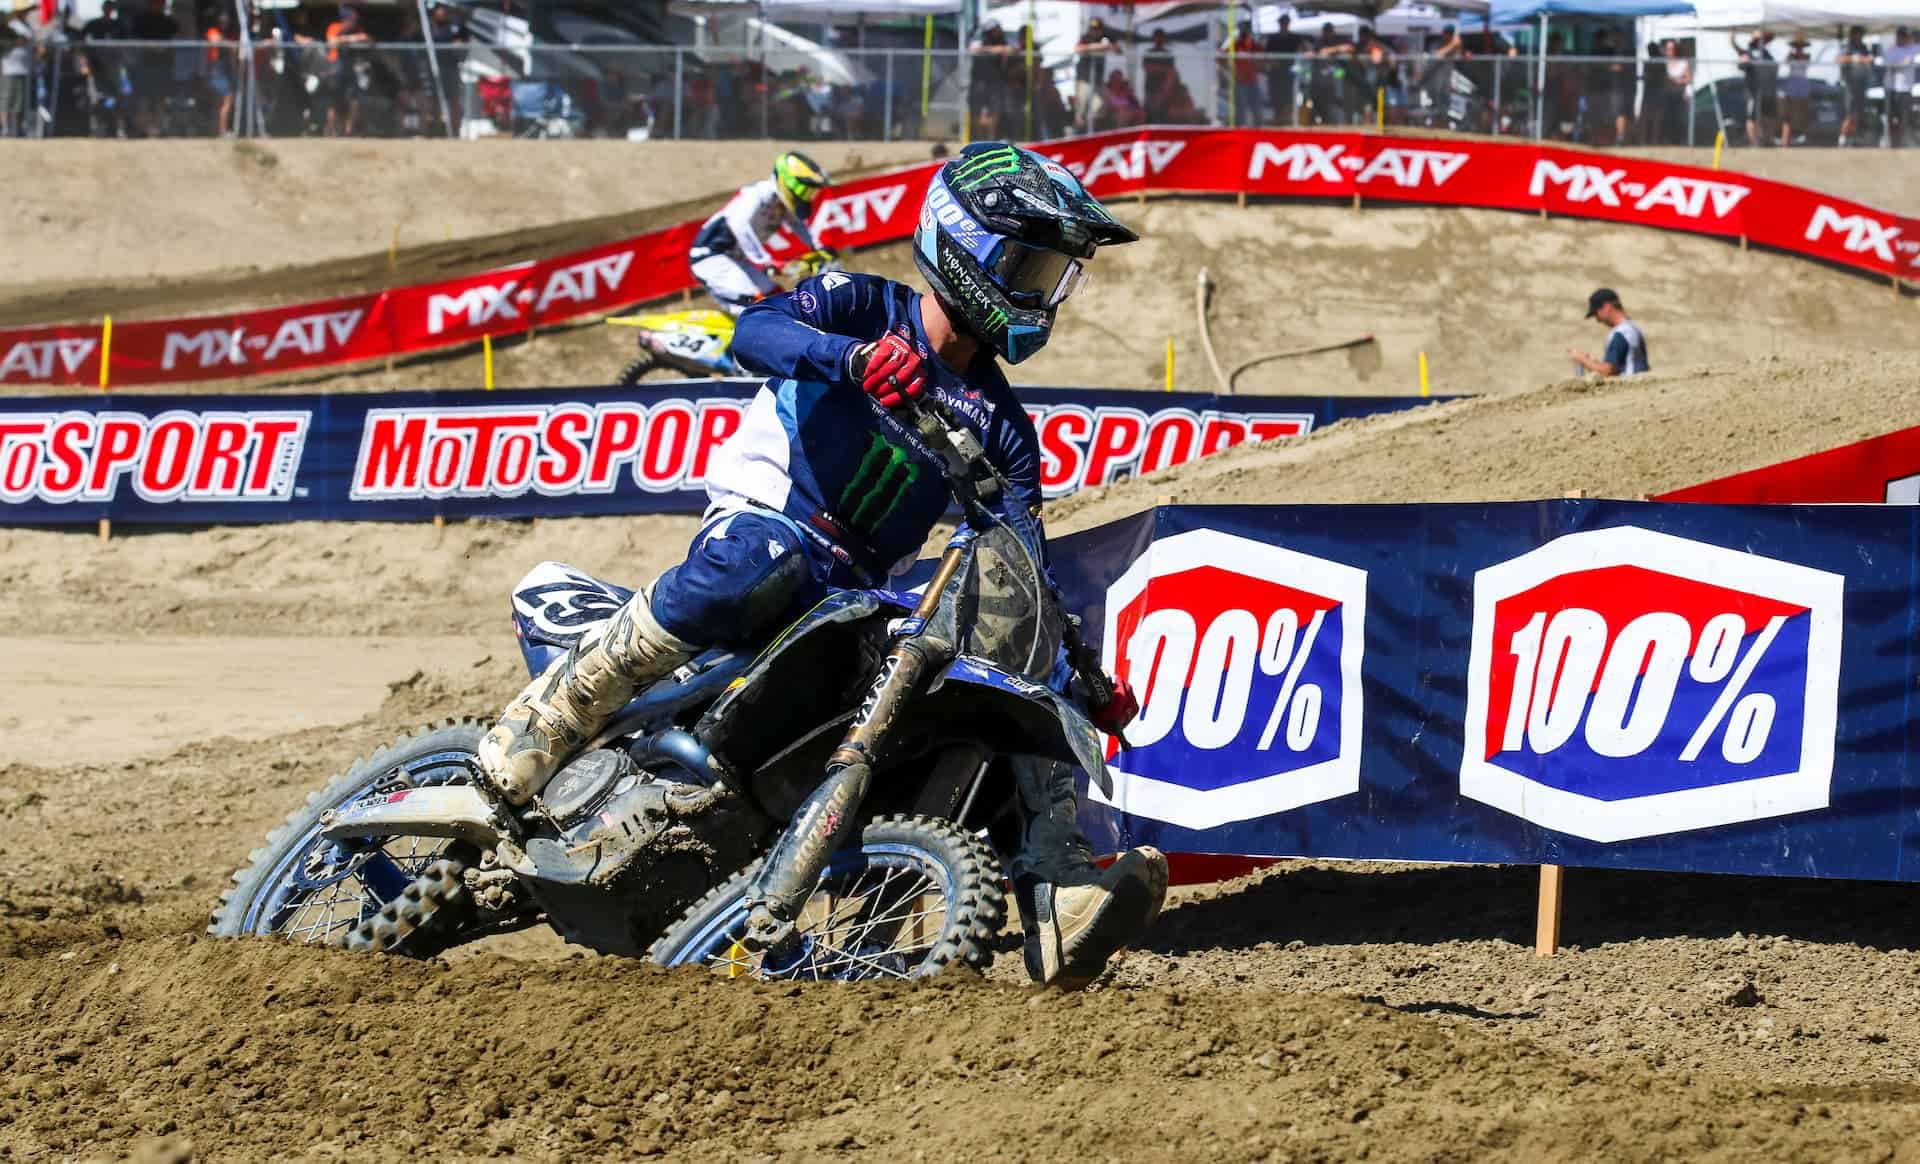 Christian Craig races at Maxxis Fox Raceway 2 for Round 11 of the 2021 Lucas Oil Pro Motocross Championship. Photo by Rachel Schuoler / Kickin' the Tires.